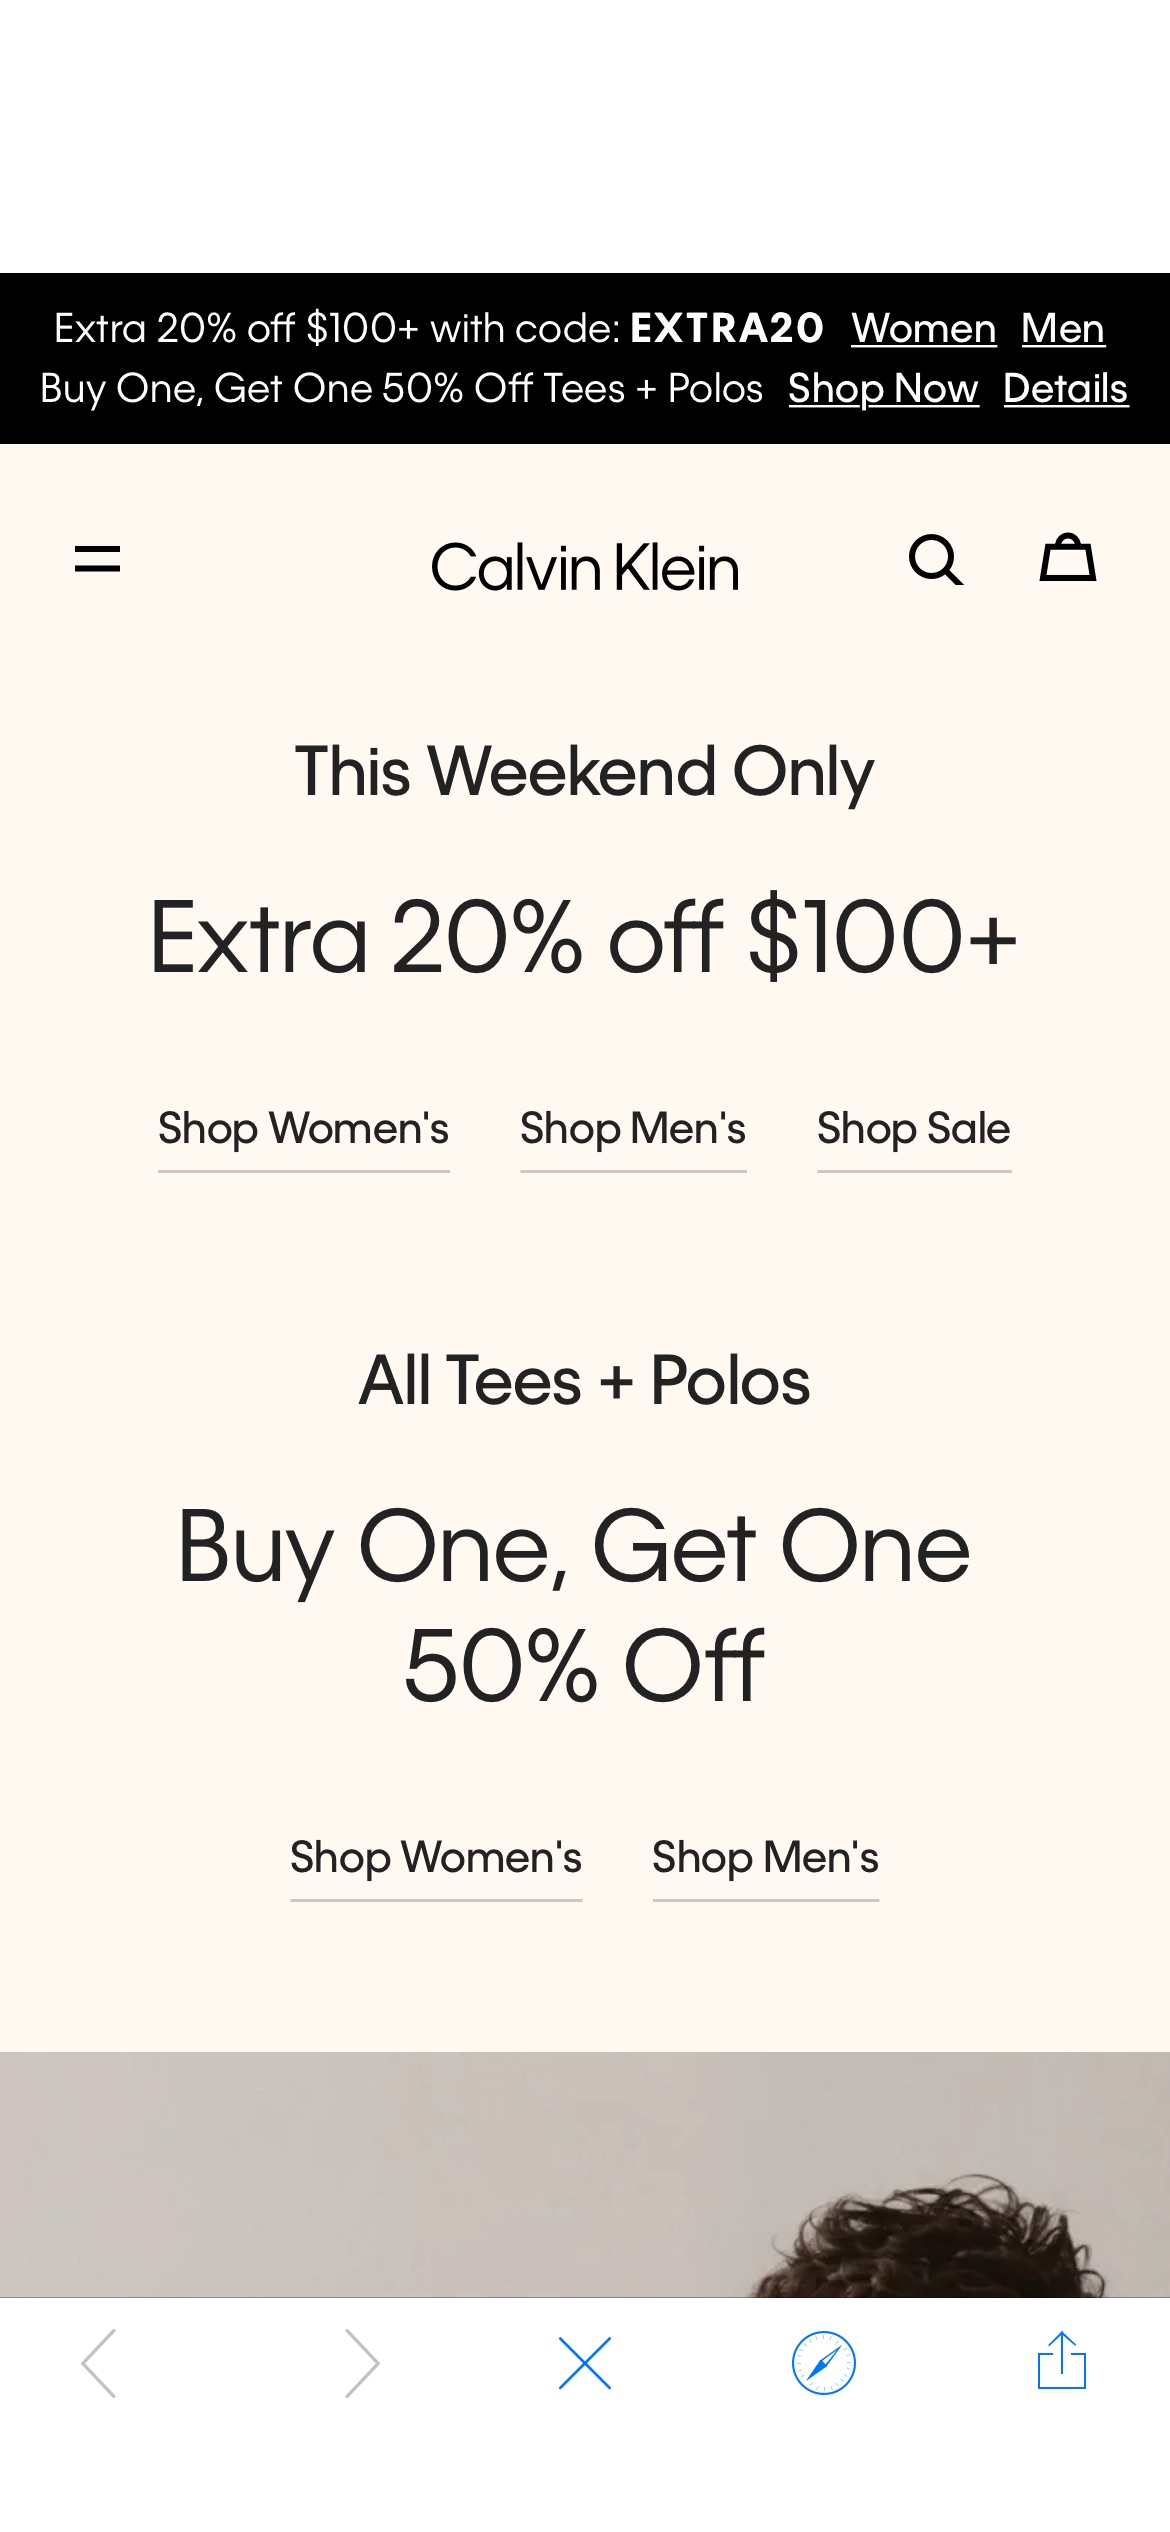 Buy one get one 50% off